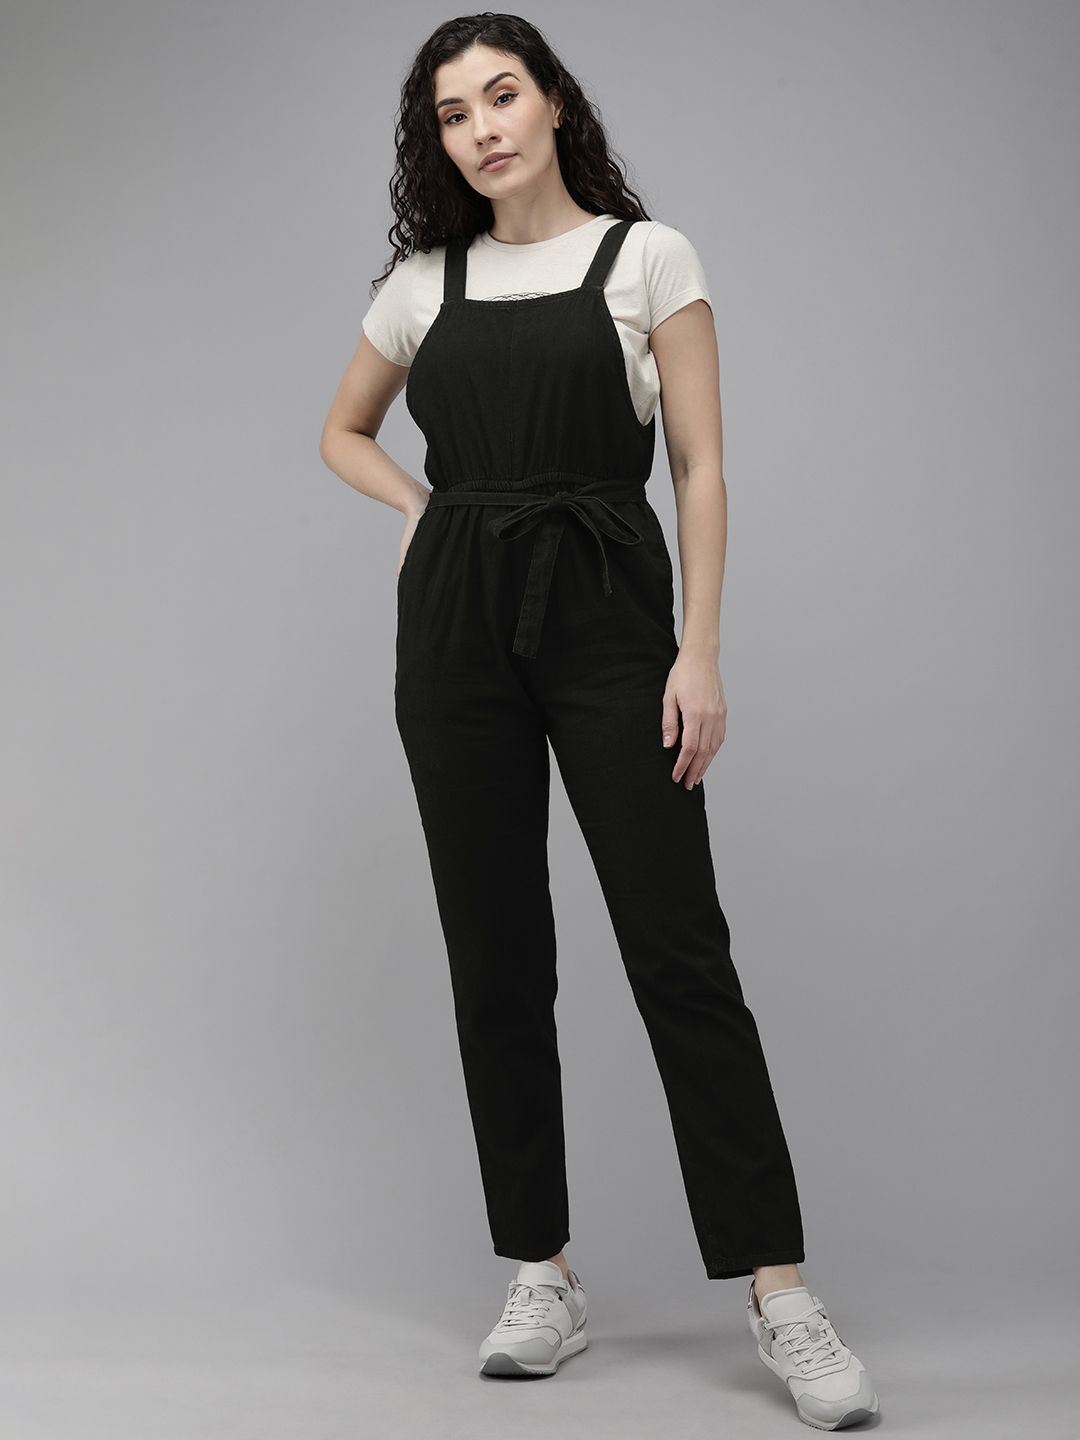 The Roadster Lifestyle Co Black Basic Jumpsuit Price in India